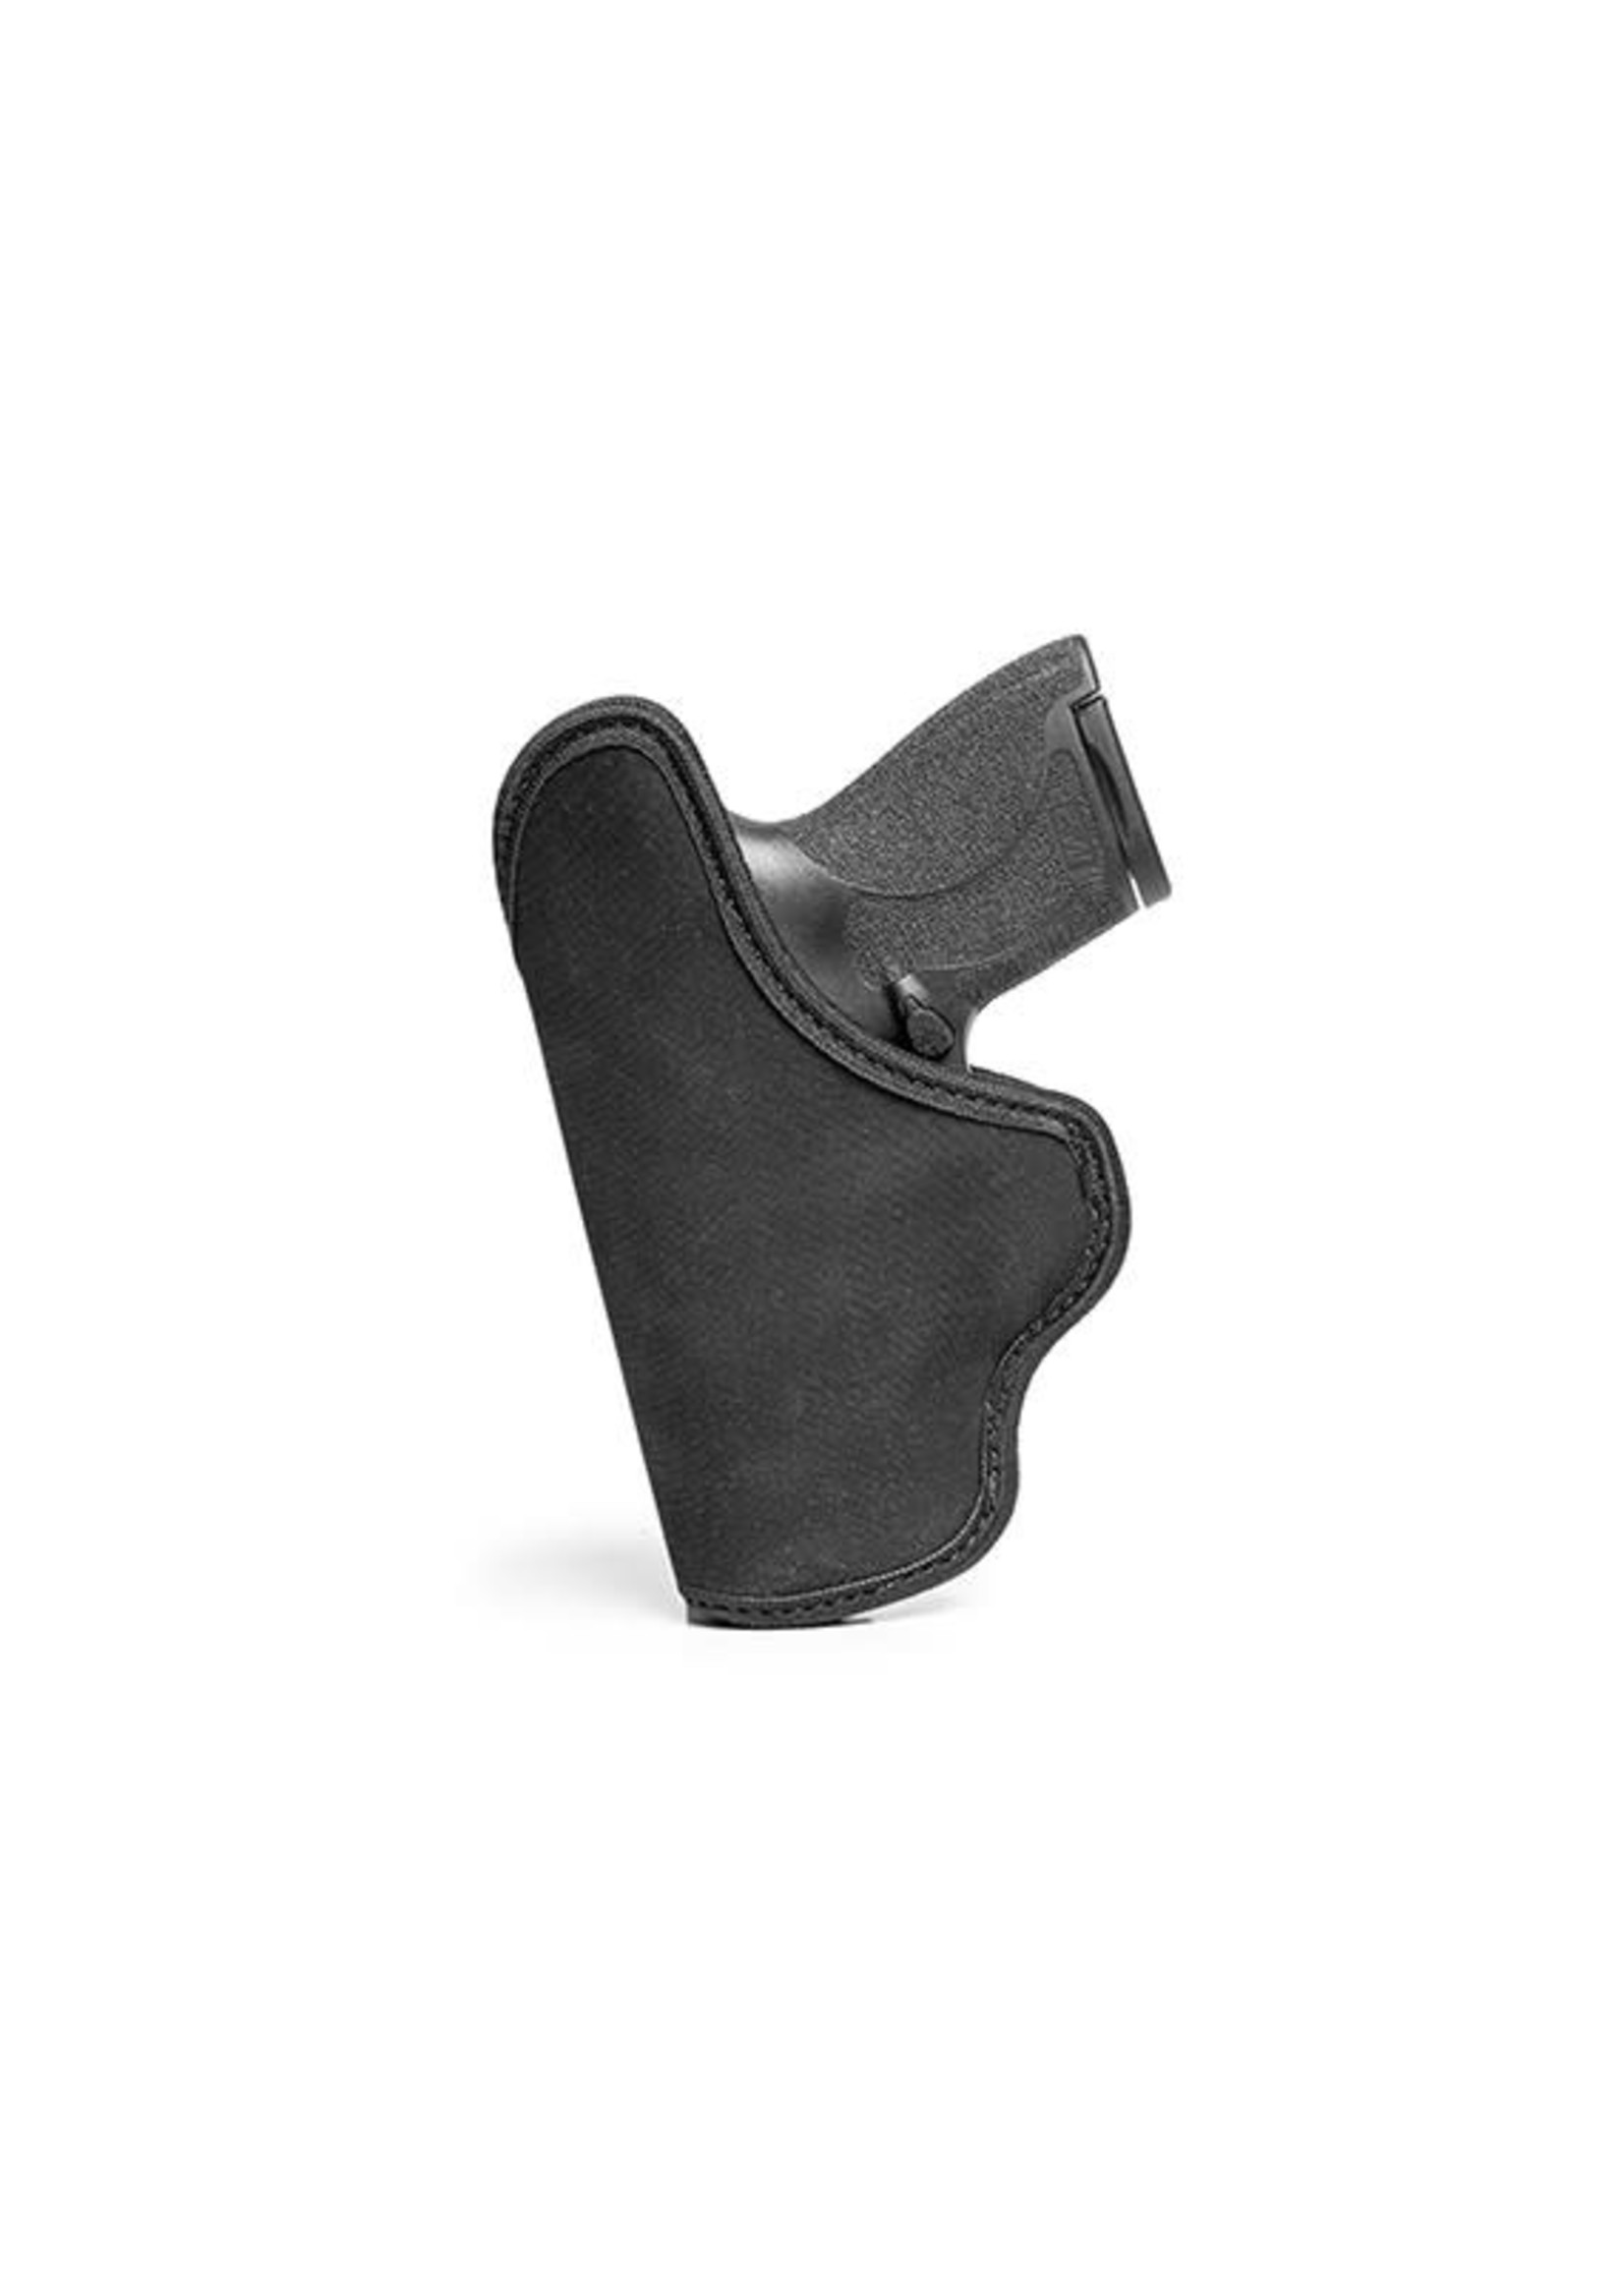 Alien Gear Holsters CLEARANCE  Alien Gear Grip Tuck Universal Holster - Subcompact, LH, Double Stack